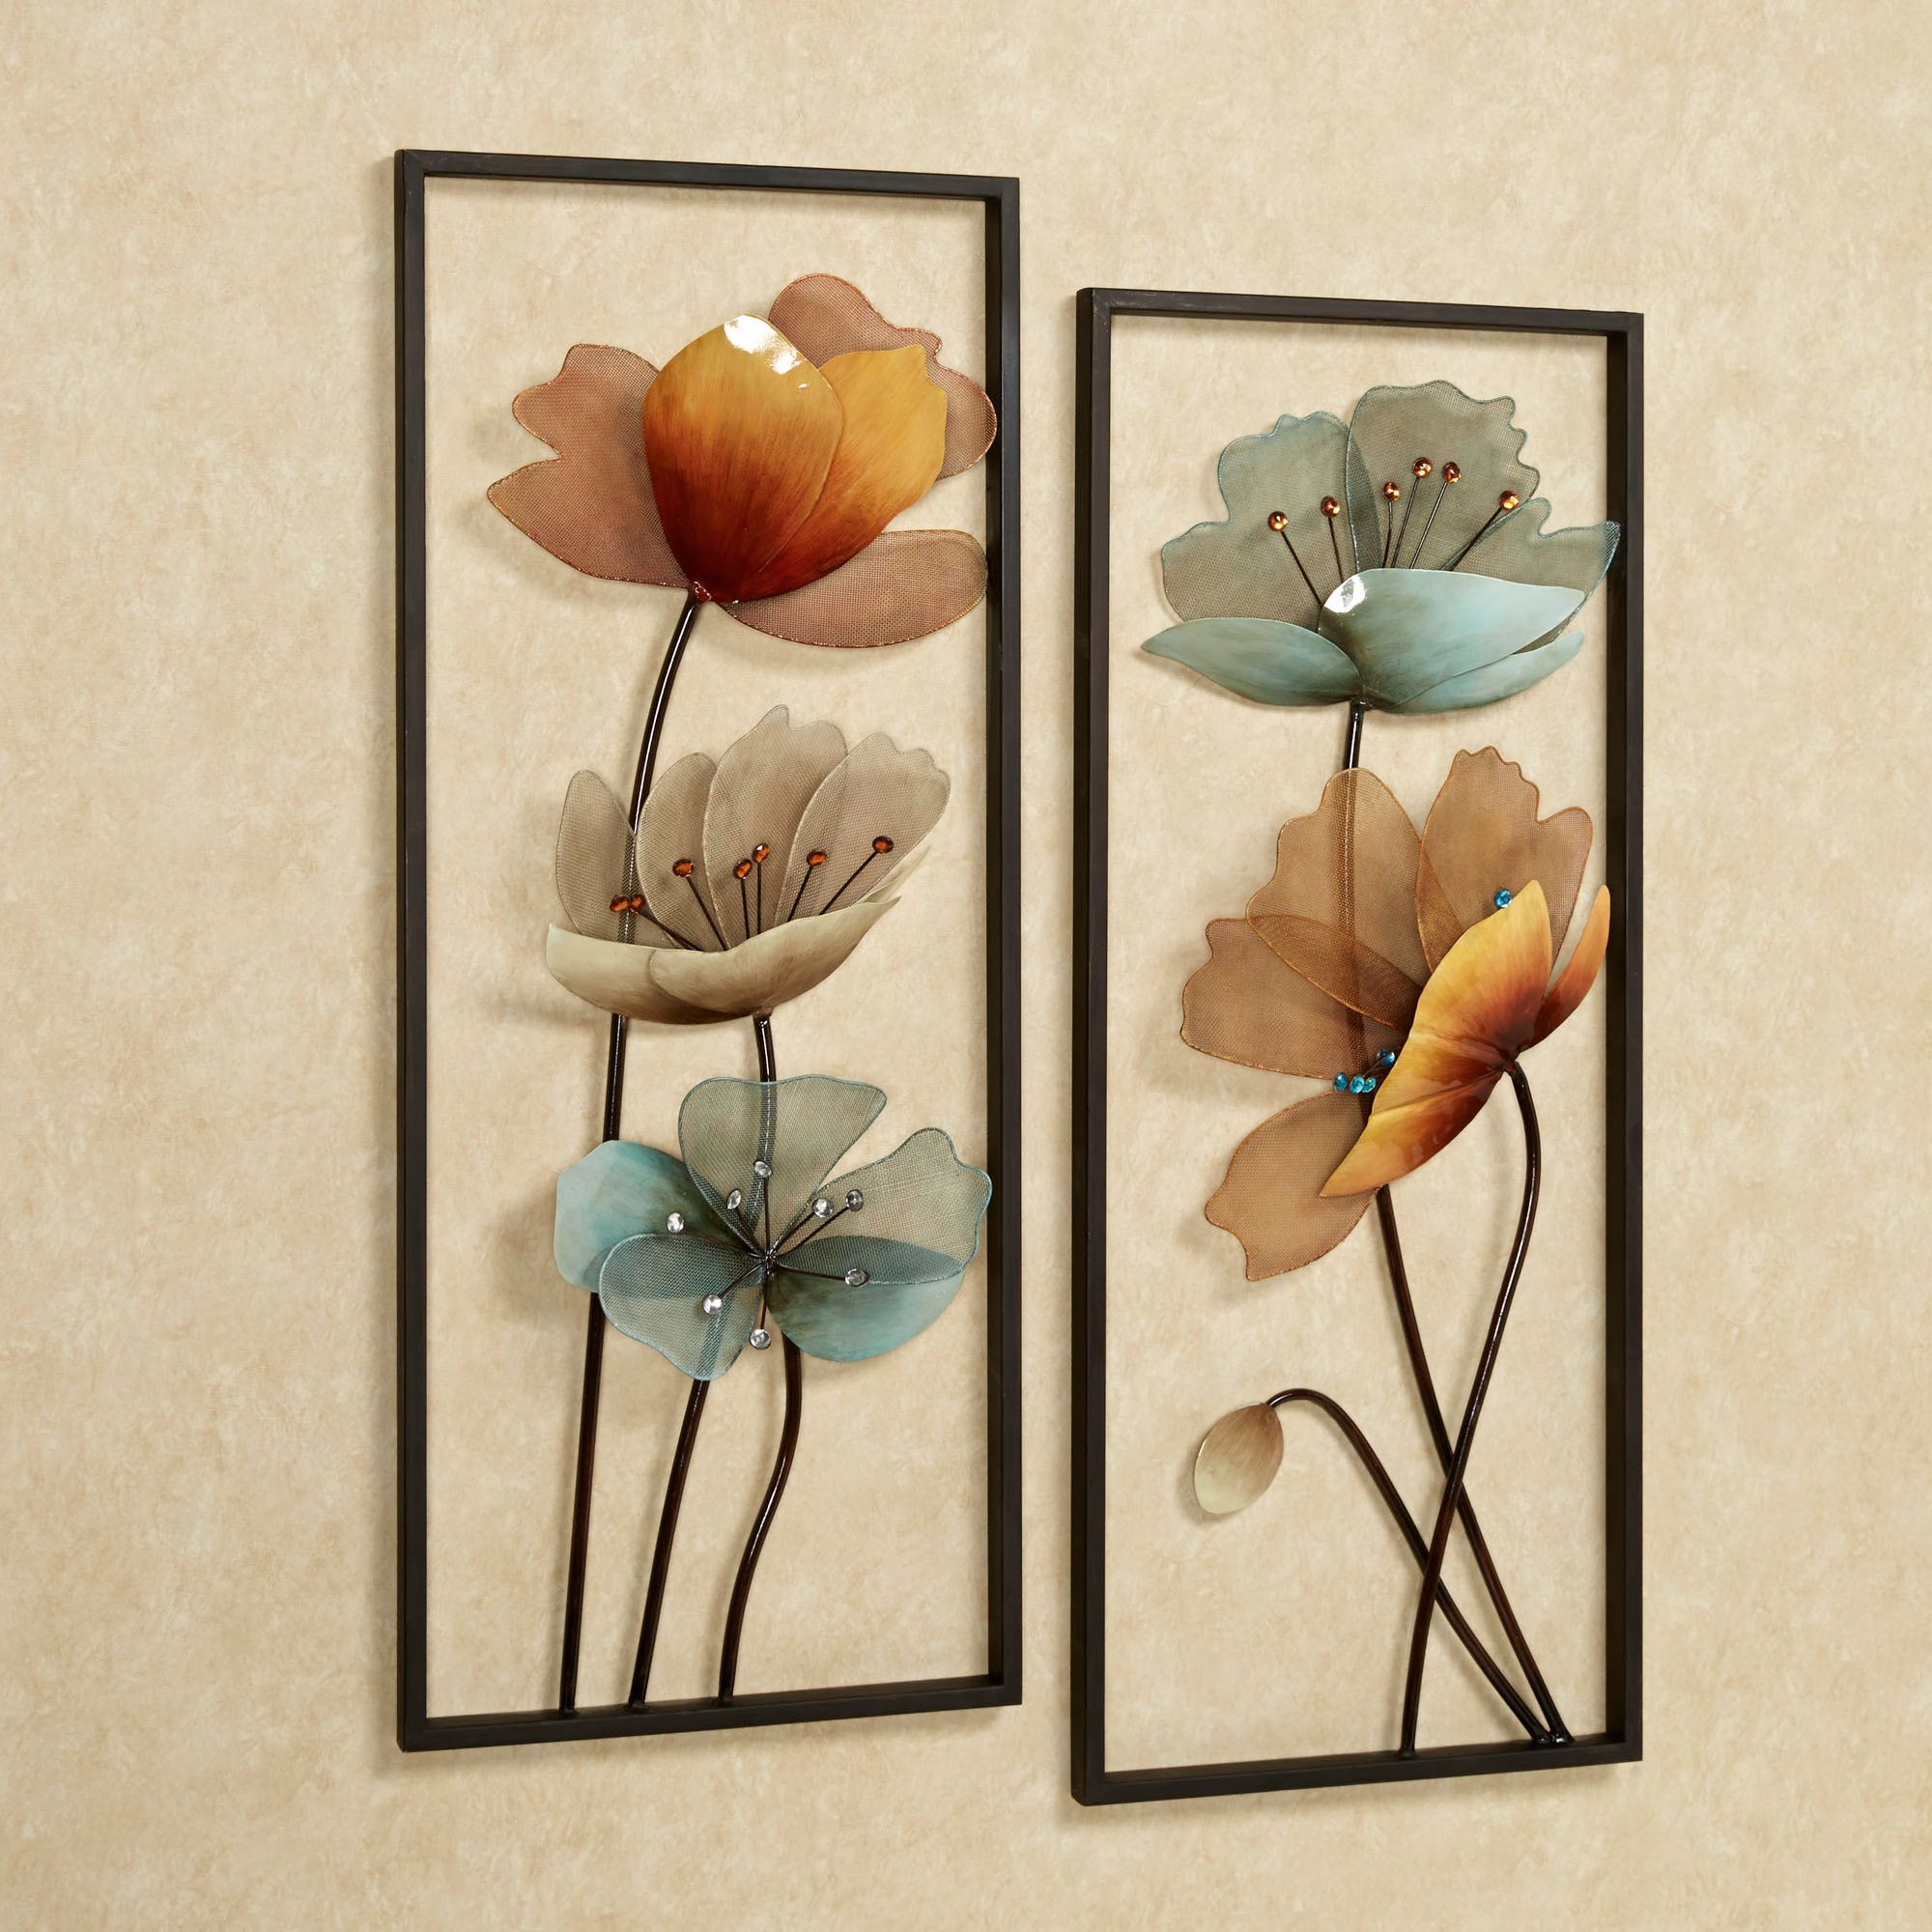 metal flowers for vase of tuscany in bloom floral metal wall art set wall decor pinterest intended for tuscany in bloom wall art panels brown set of two metal flower wall decor metal